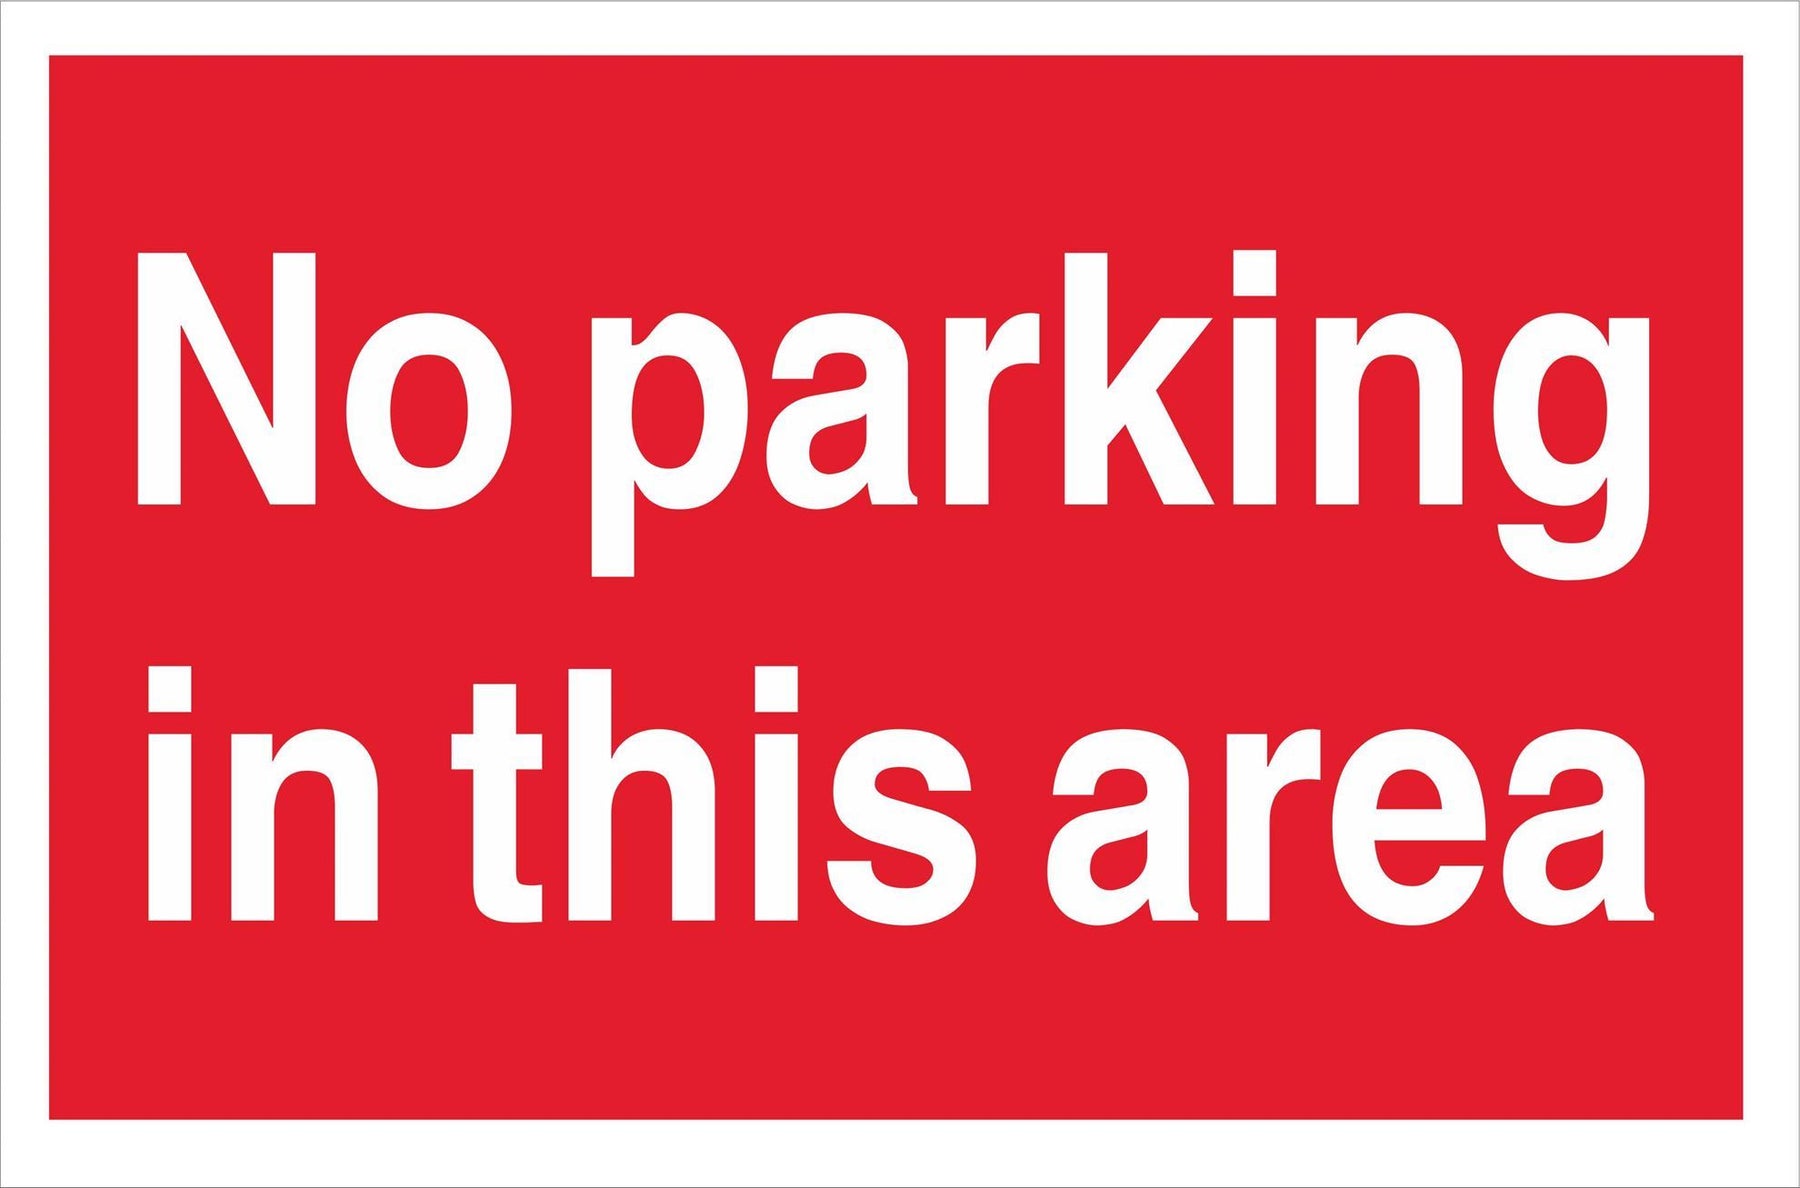 No parking in this area